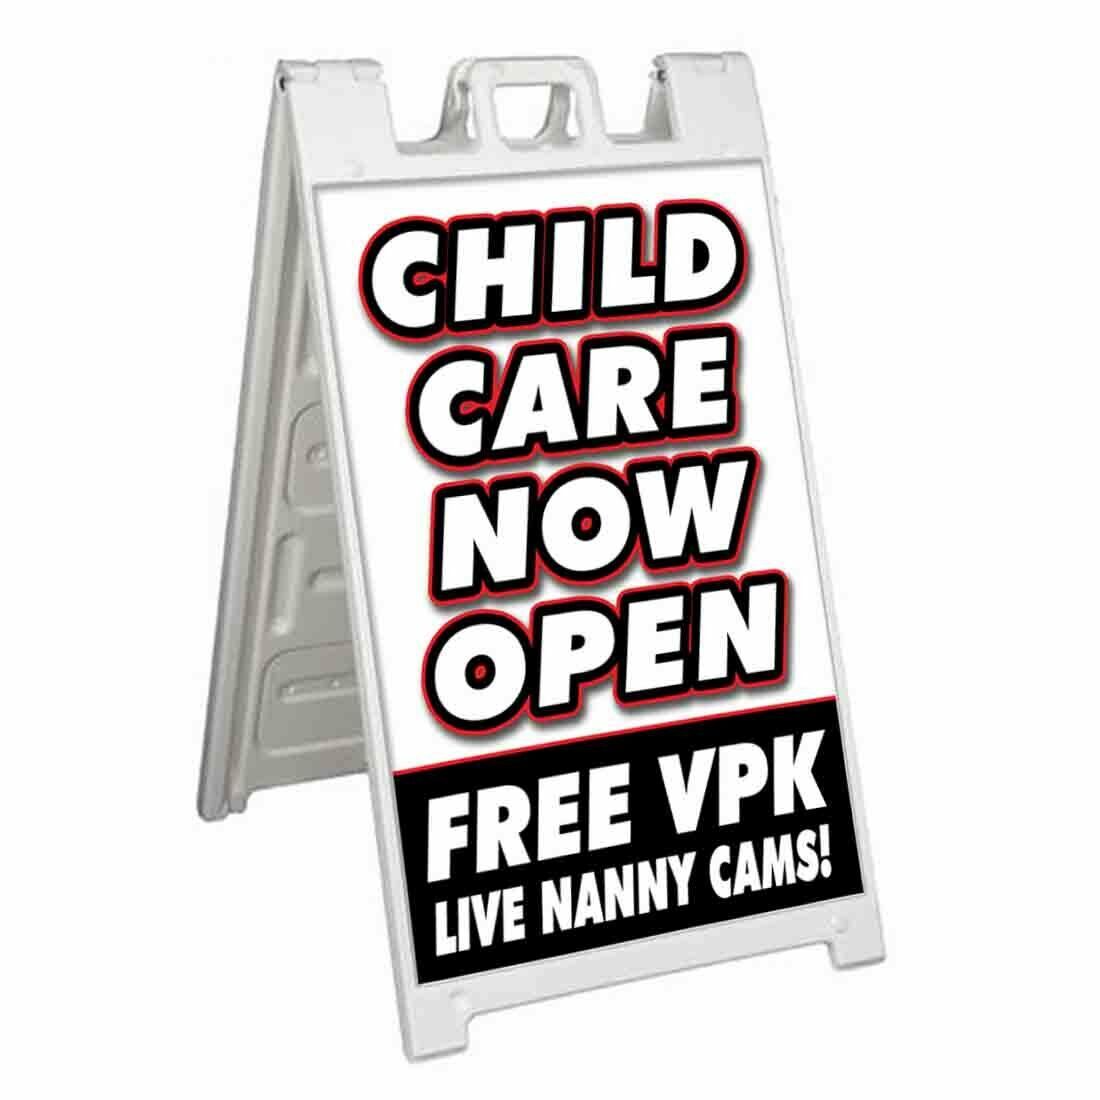 CHILD CARE NOW OPEN FREE VPK Signicade 24x36 A Frame Sidewalk Sign Double Sided